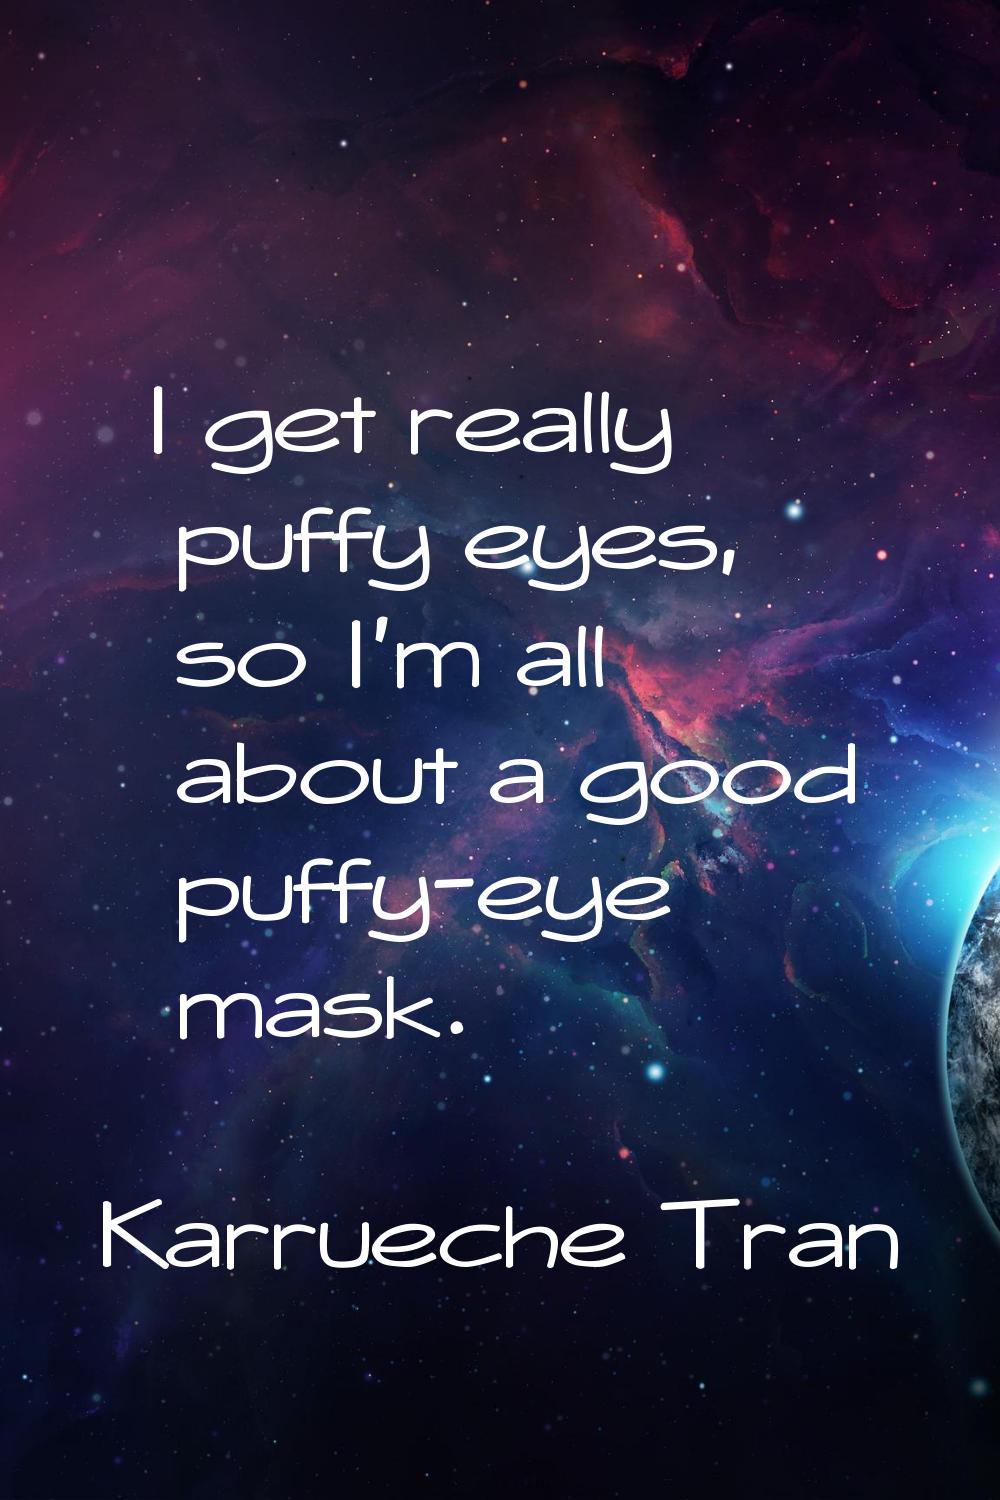 I get really puffy eyes, so I'm all about a good puffy-eye mask.